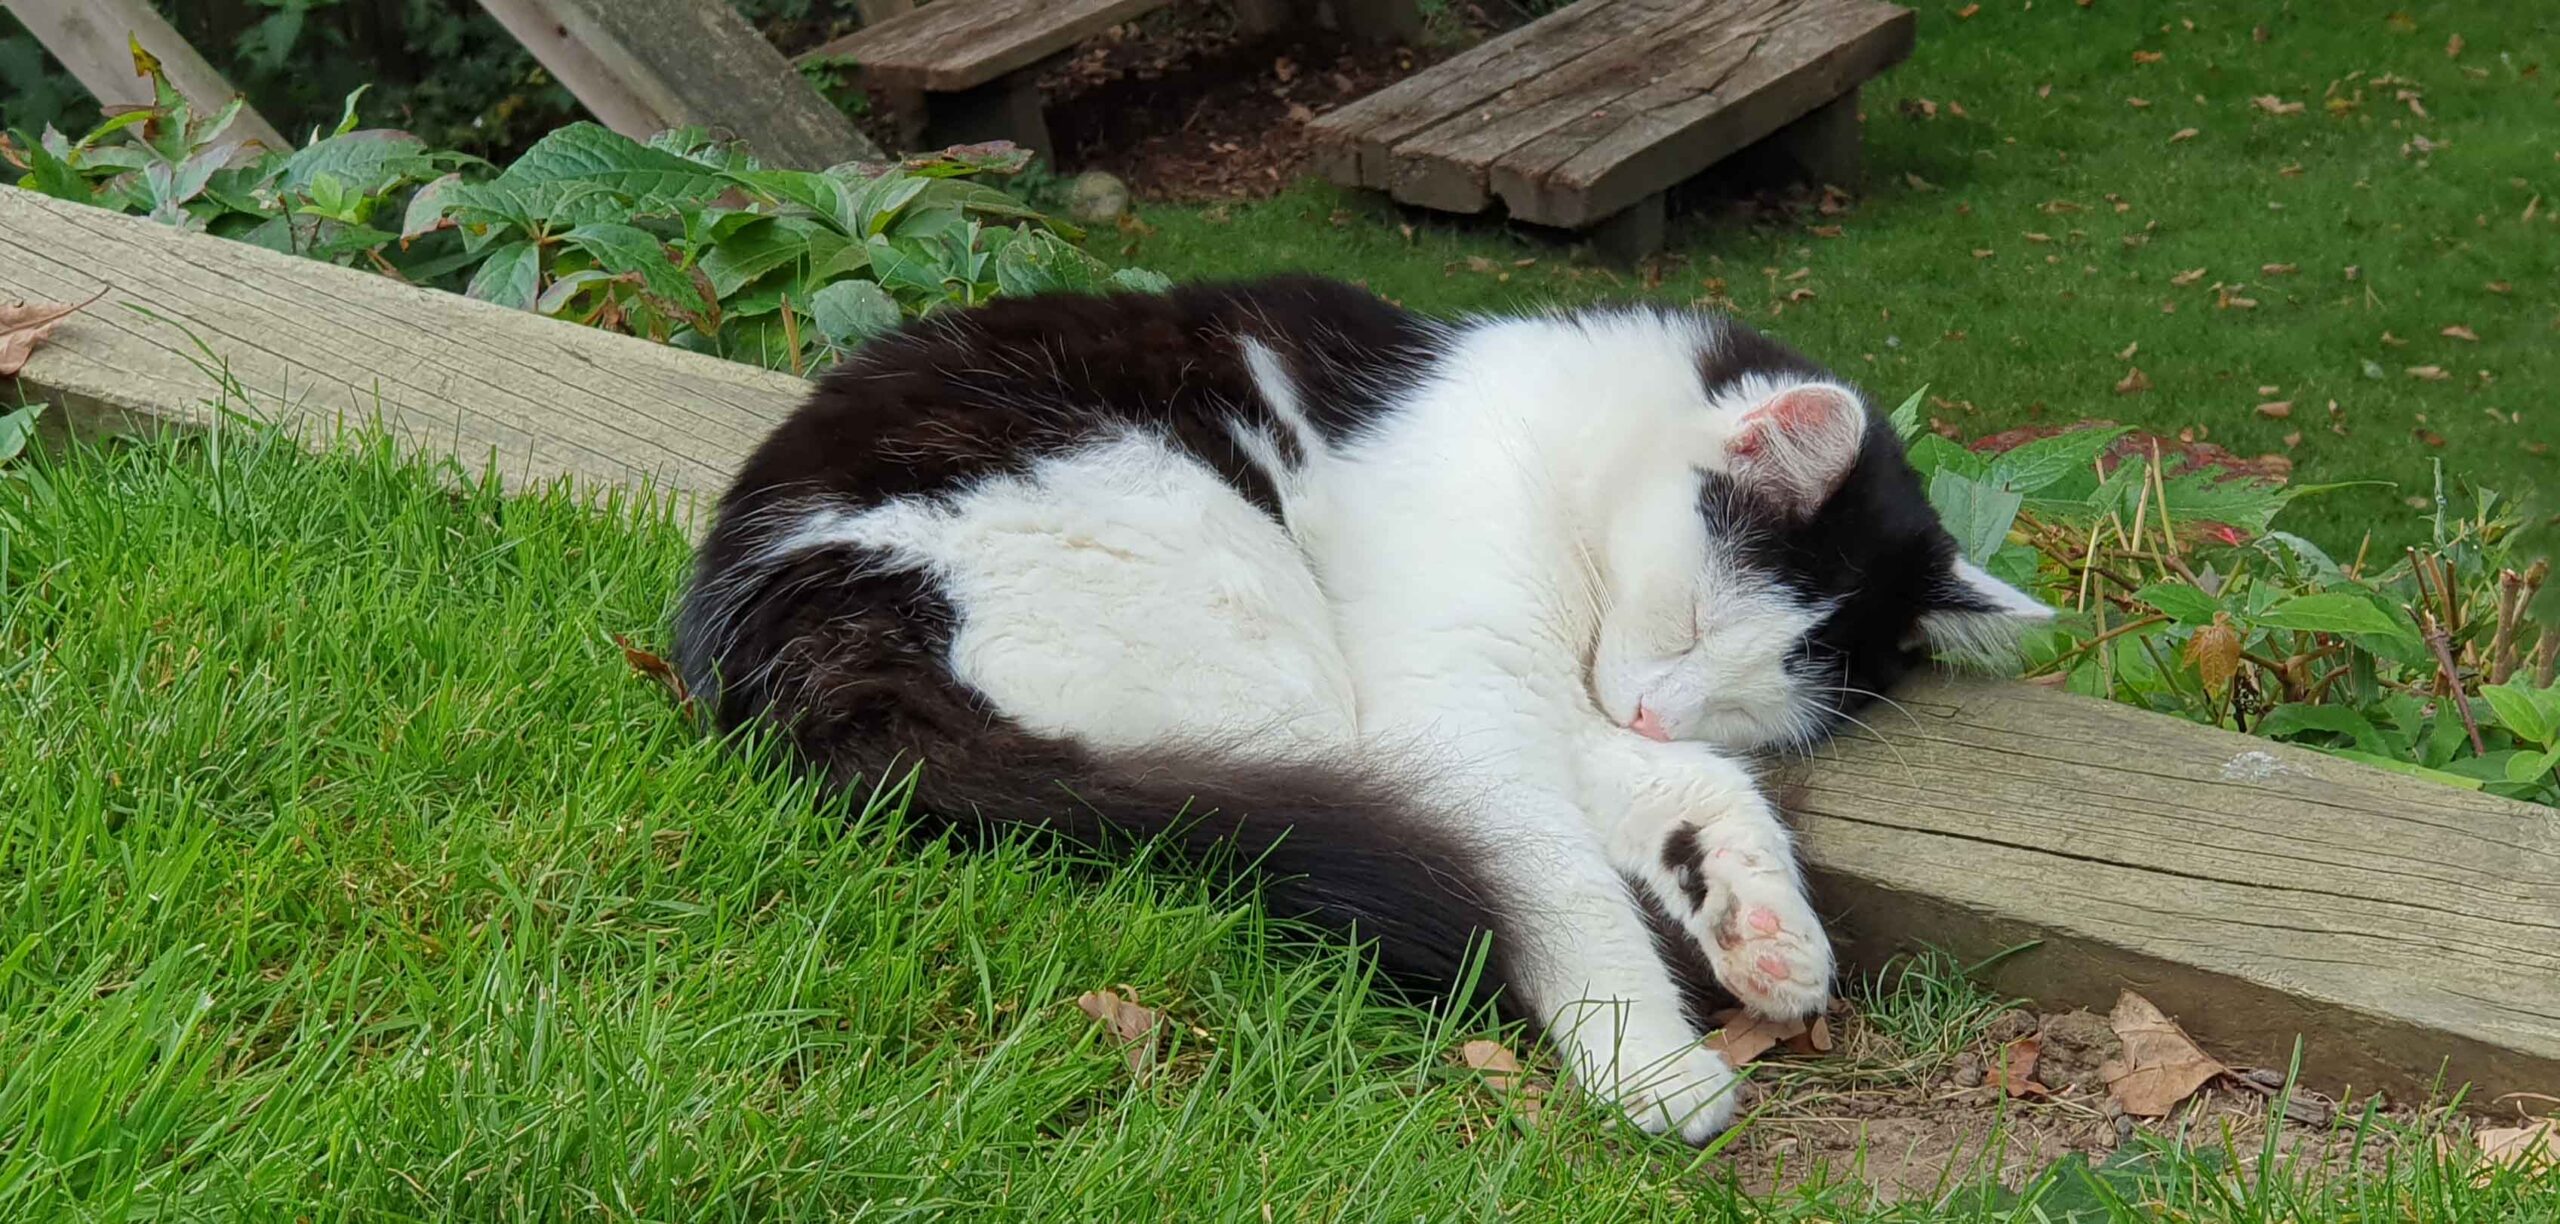 You cannot look at a sleeping cat and feel tense